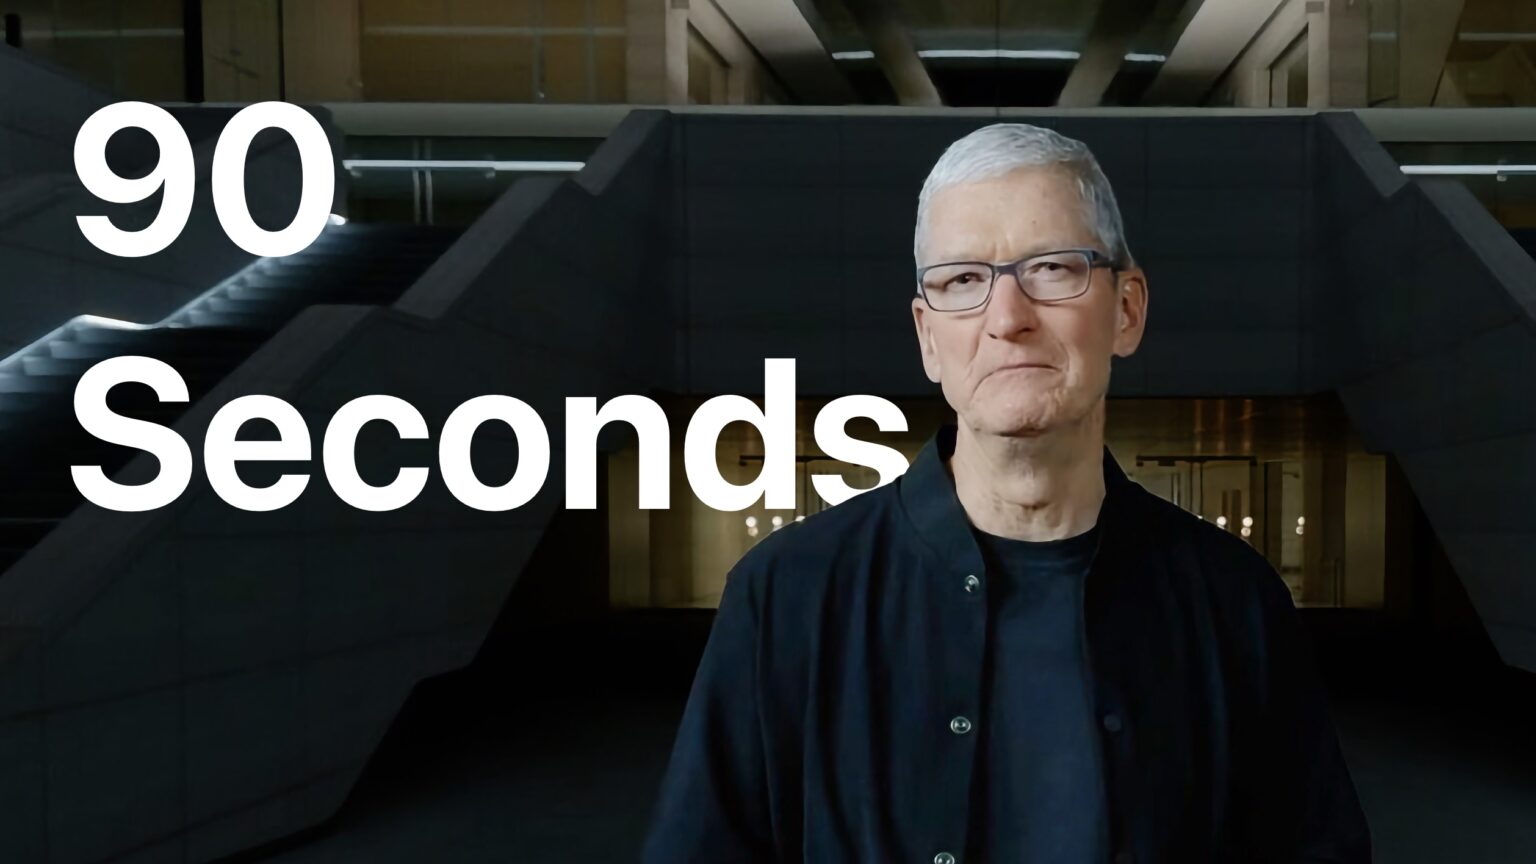 Image of Tim Cook: “90 seconds.”